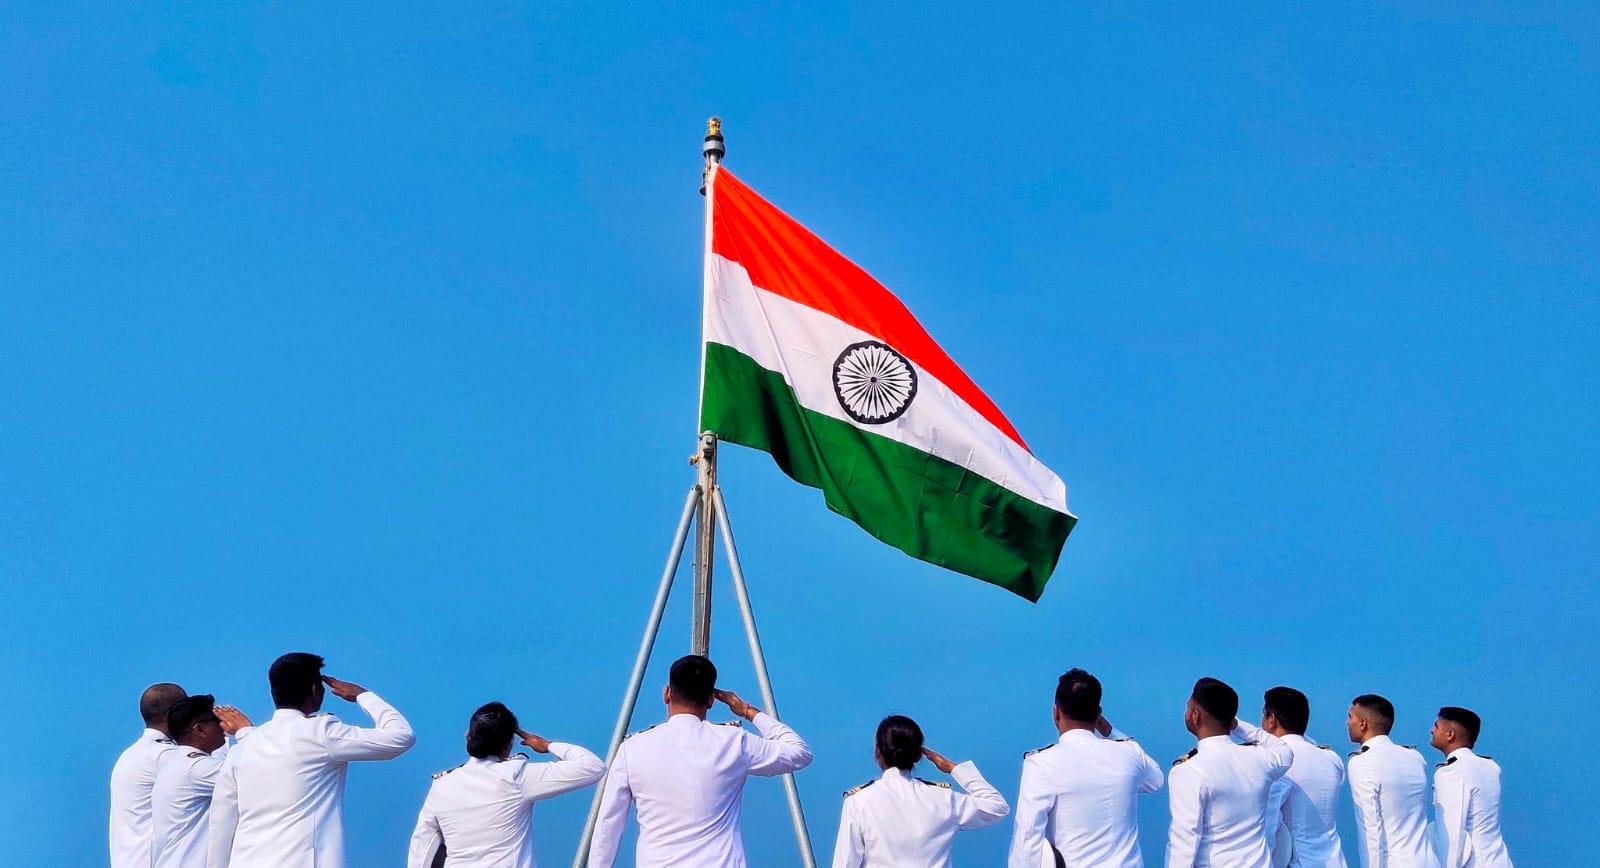 Indian Navy adopts 360 degree appraisal system